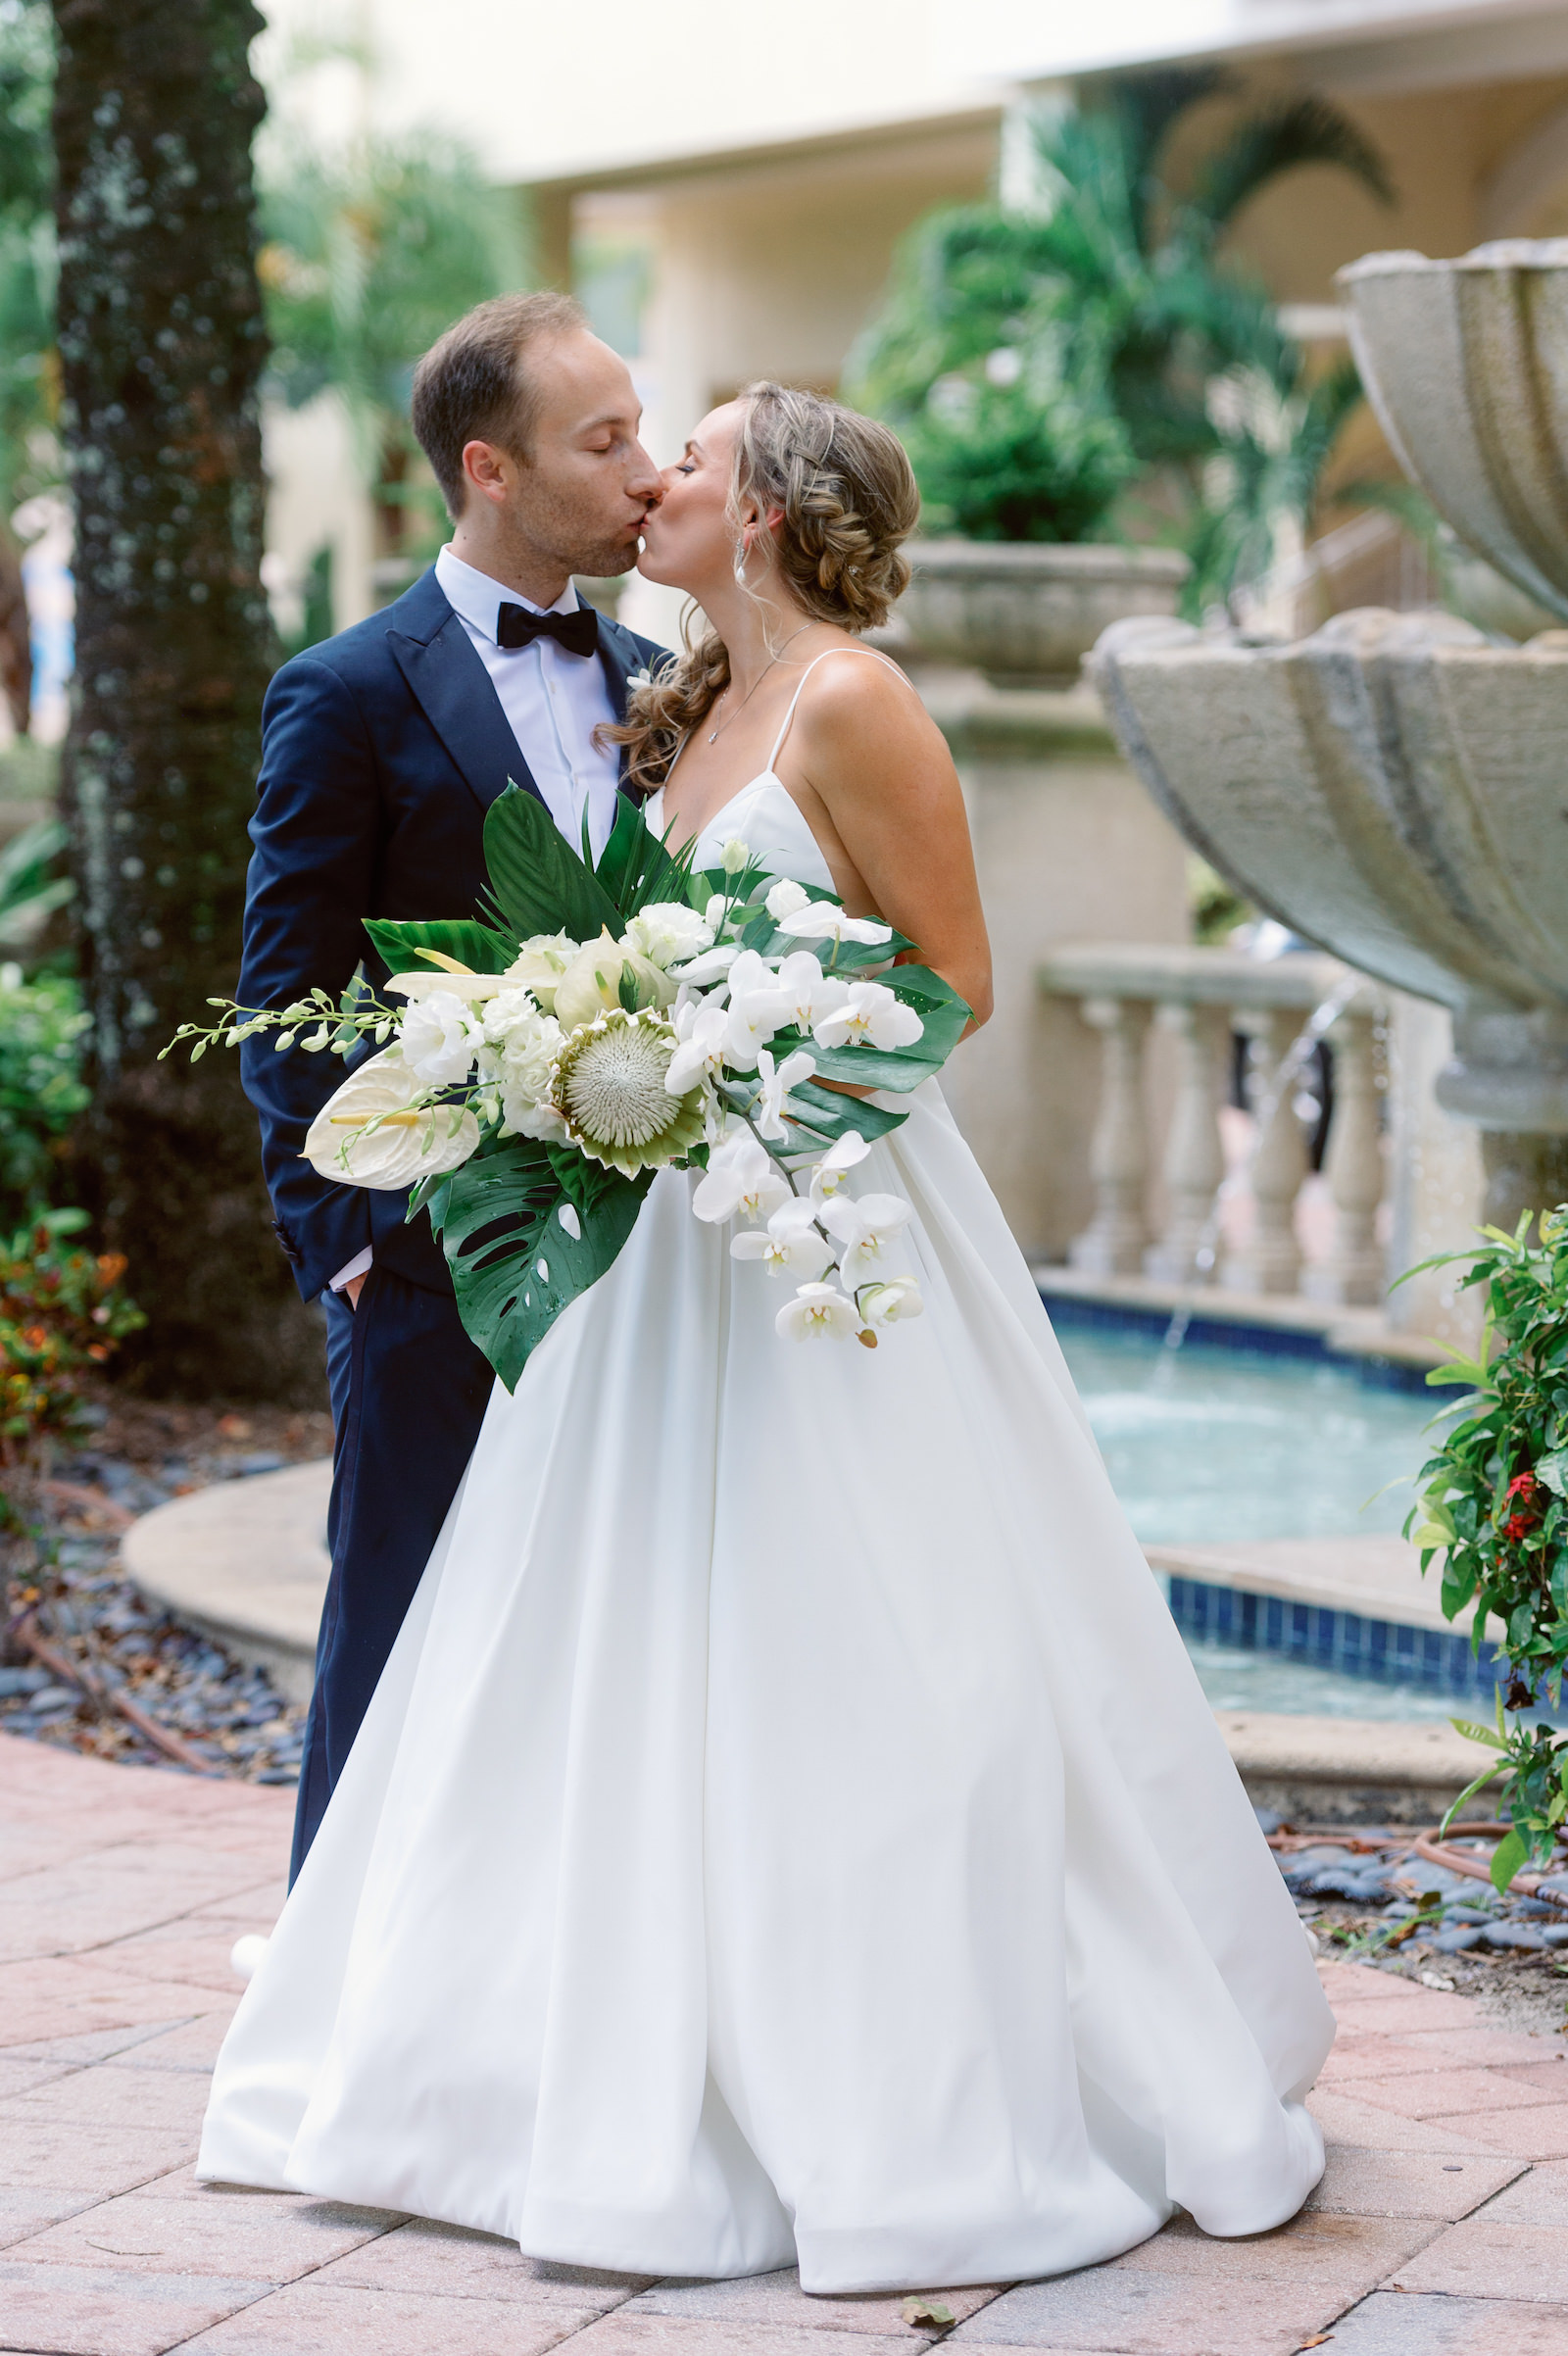 White and Green Modern Minimalist Tropical Wedding, Bride Wearing Chic Spaghetti Strap V Neckline A-Line Wedding Dress Holding White King Protea, Orchids, Roses and Anthurium with Palm Tree Leaves Floral Bouquet First Look with Groom | Tampa Bay Wedding Hair and Makeup Femme Akoi Beauty Studio